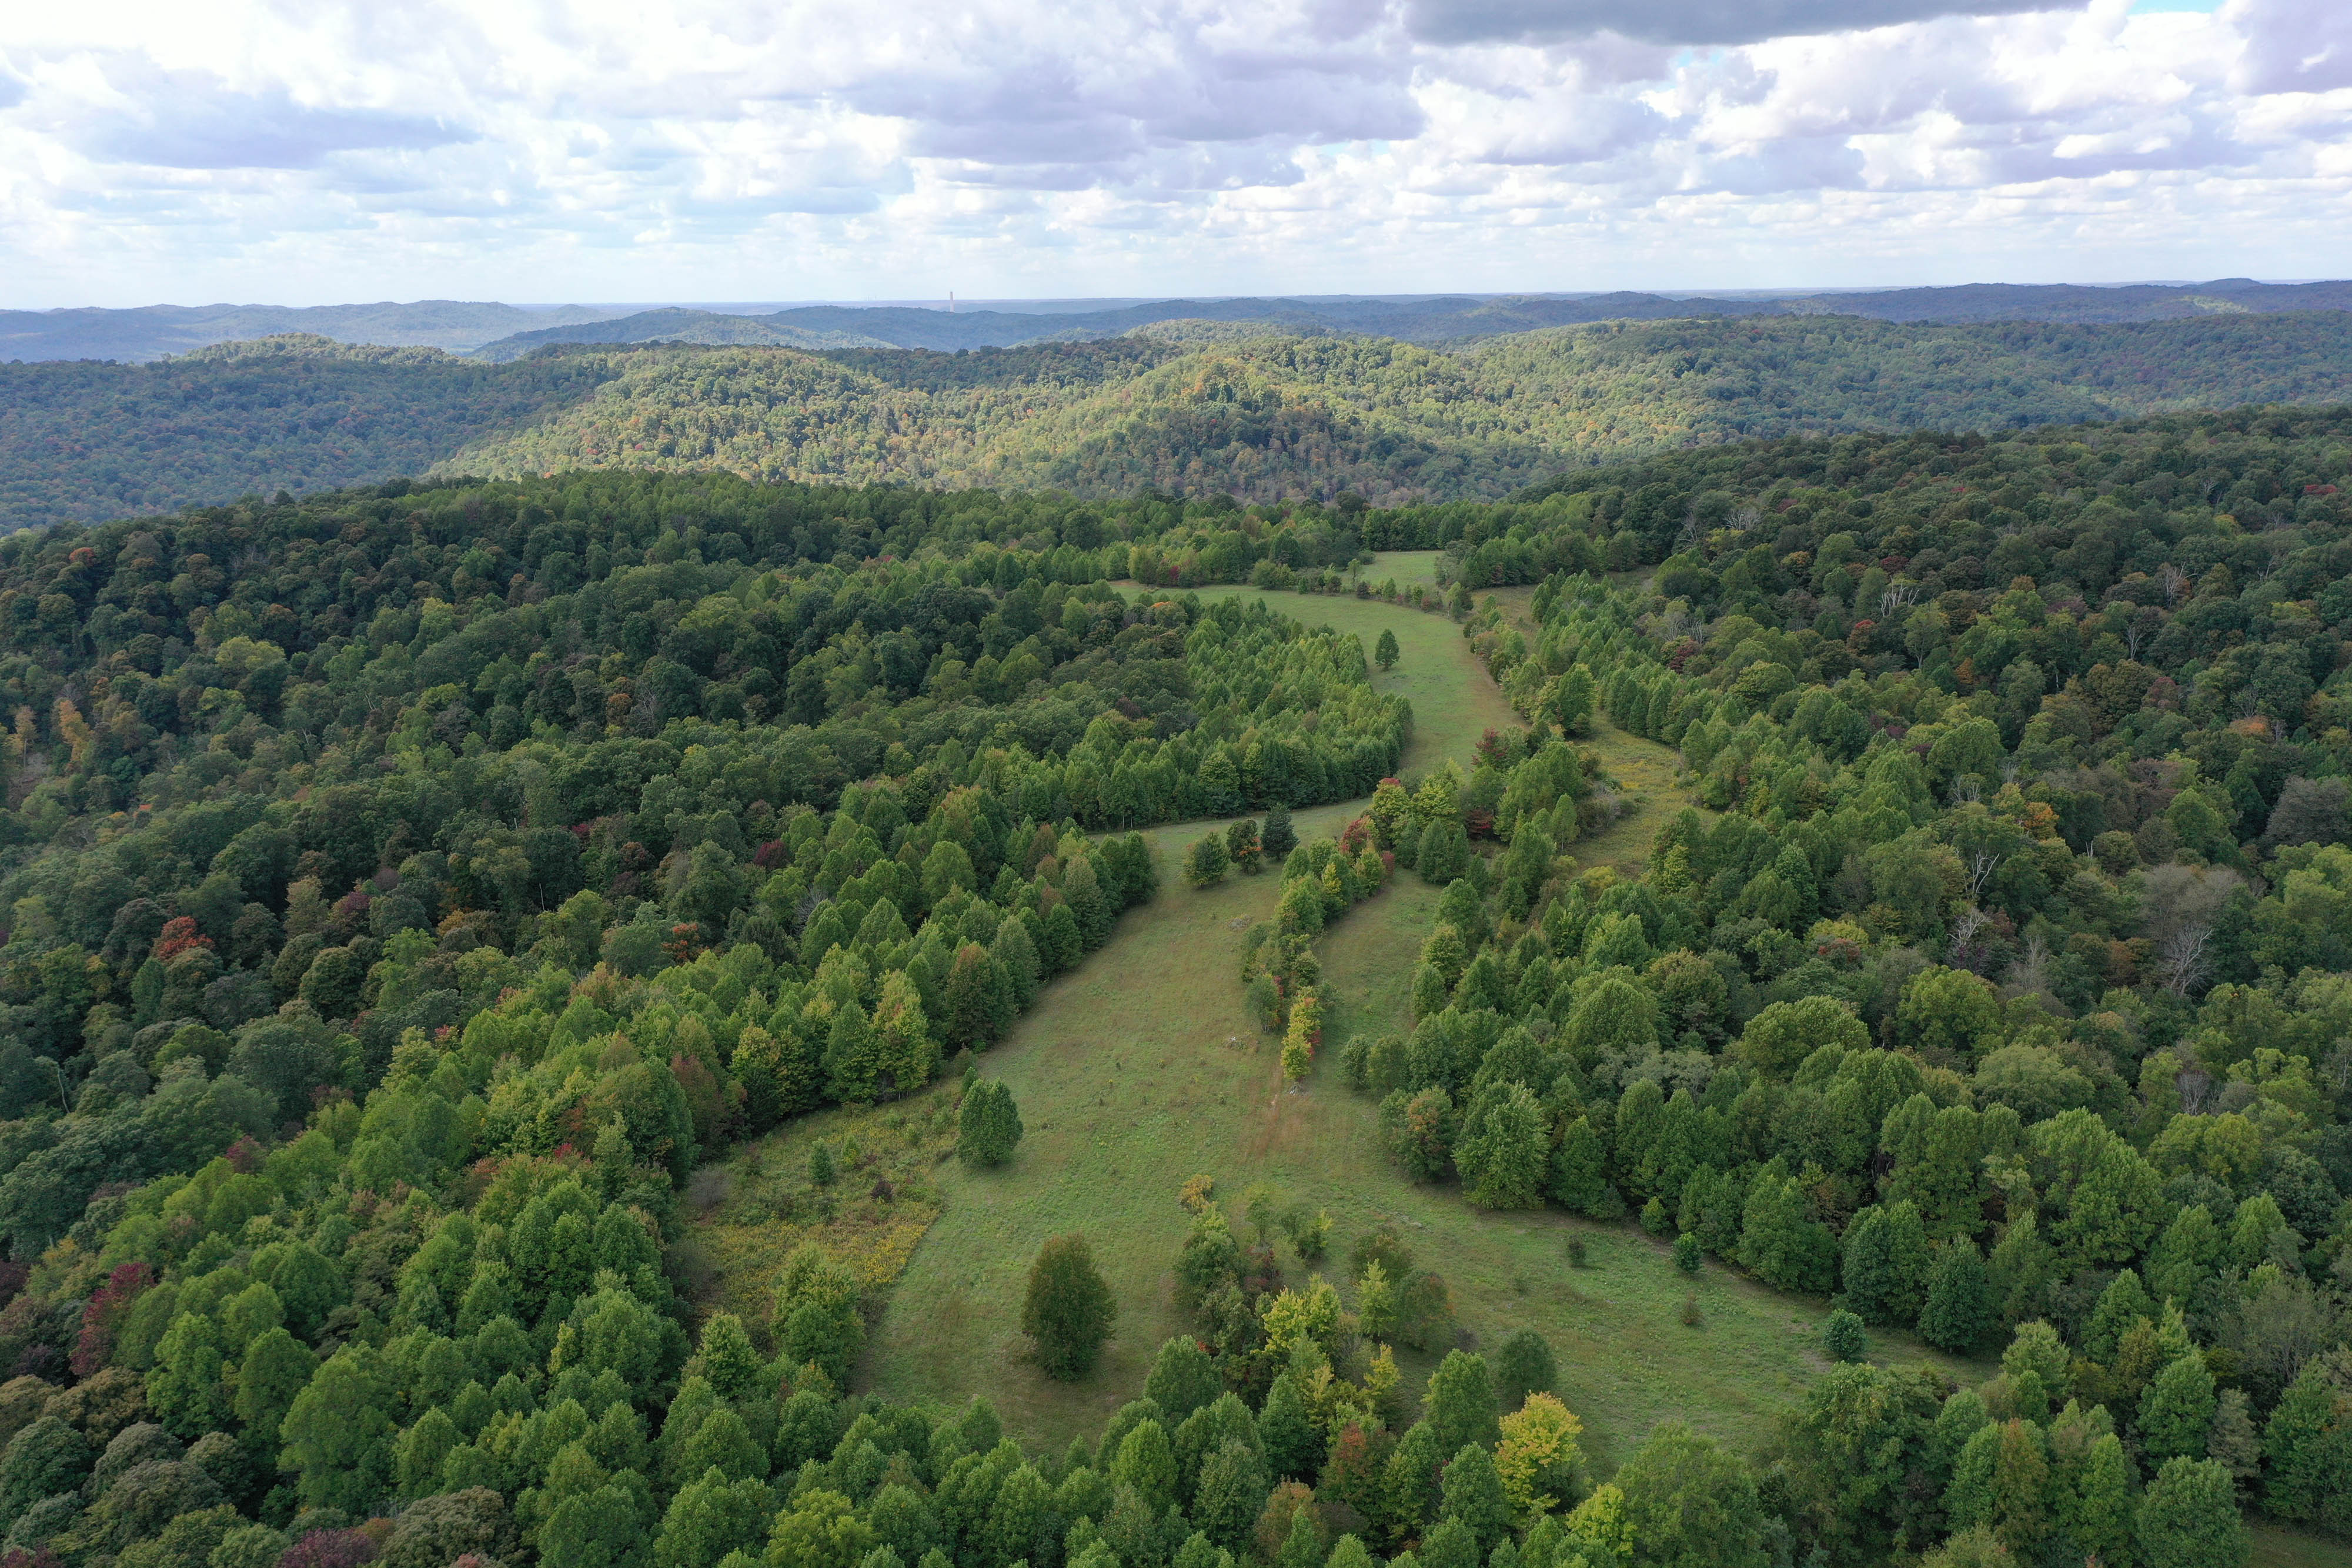 An aerial view of the forested hills of the Edge of Appalachia Preserve System.